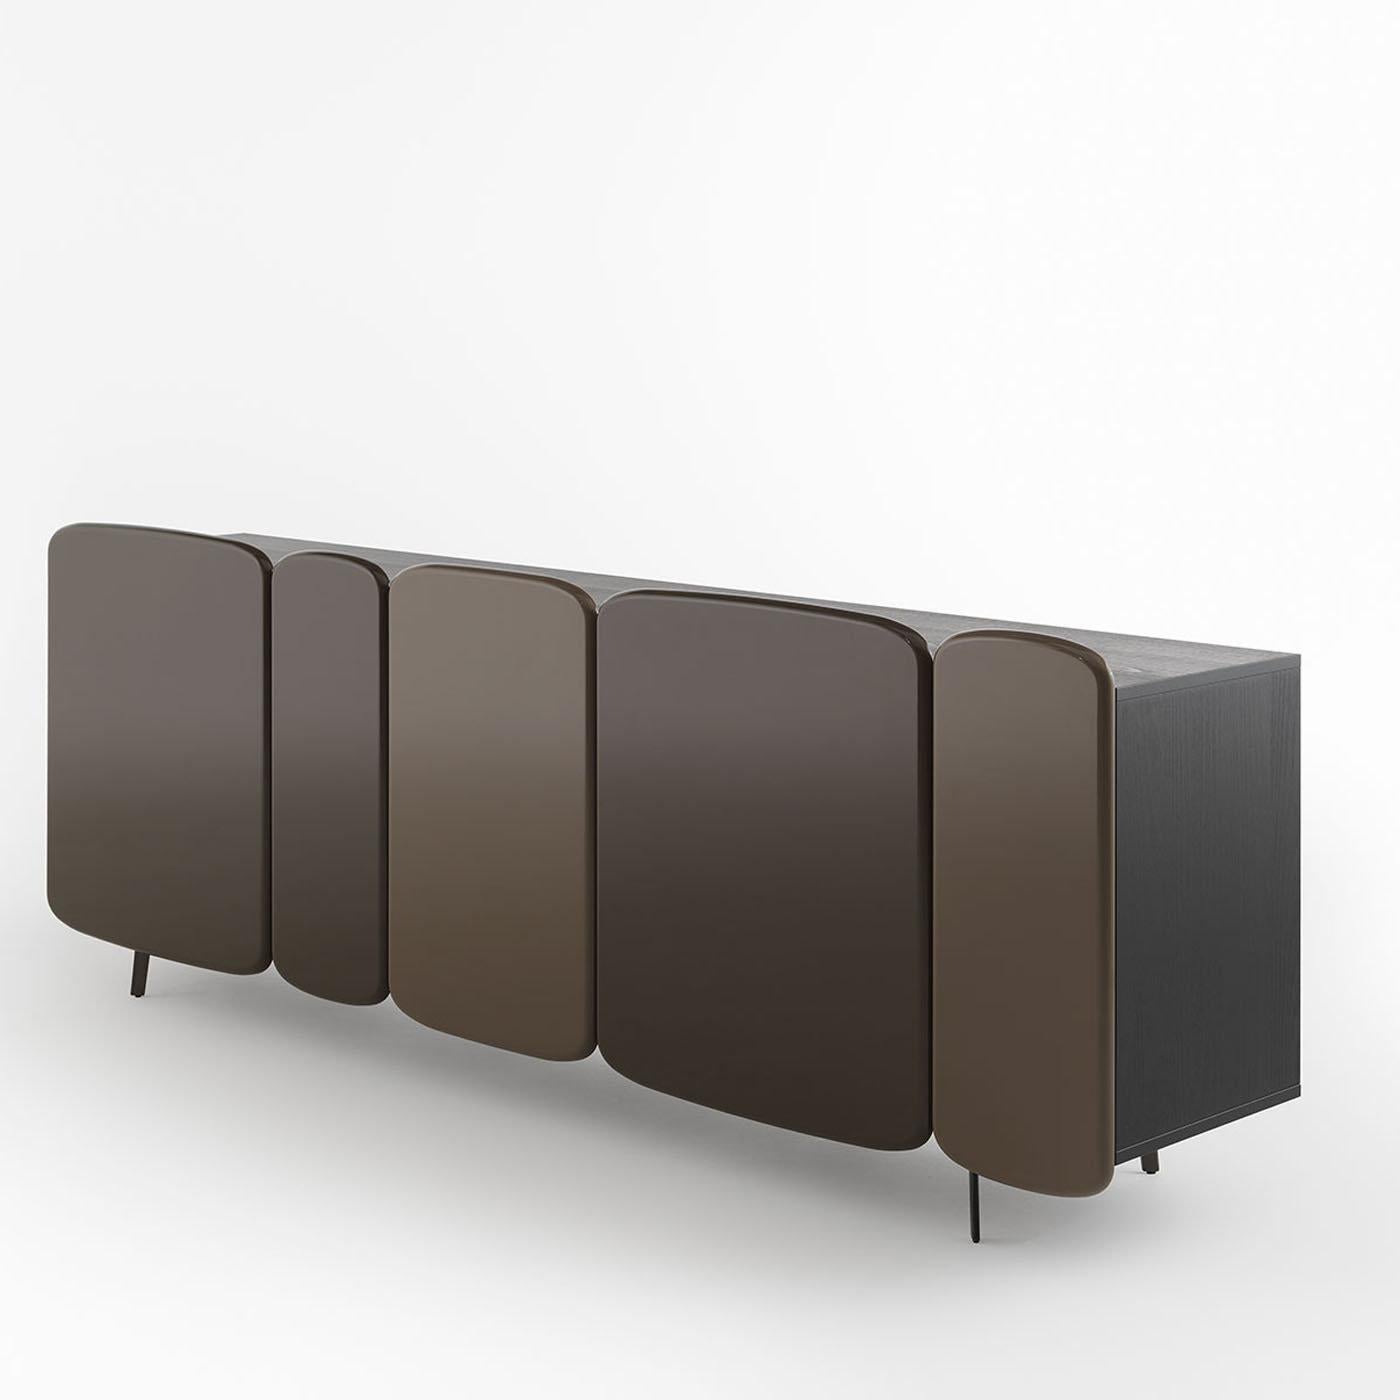 The Spectro sideboard designed by Claesson Koivisto Rune stands out for the distinctive silhouette marked by soft contours whose fluid geometry is inspired by artist Ellsworth Kelly’s works. This version features a mocha-finished beech MDF structure